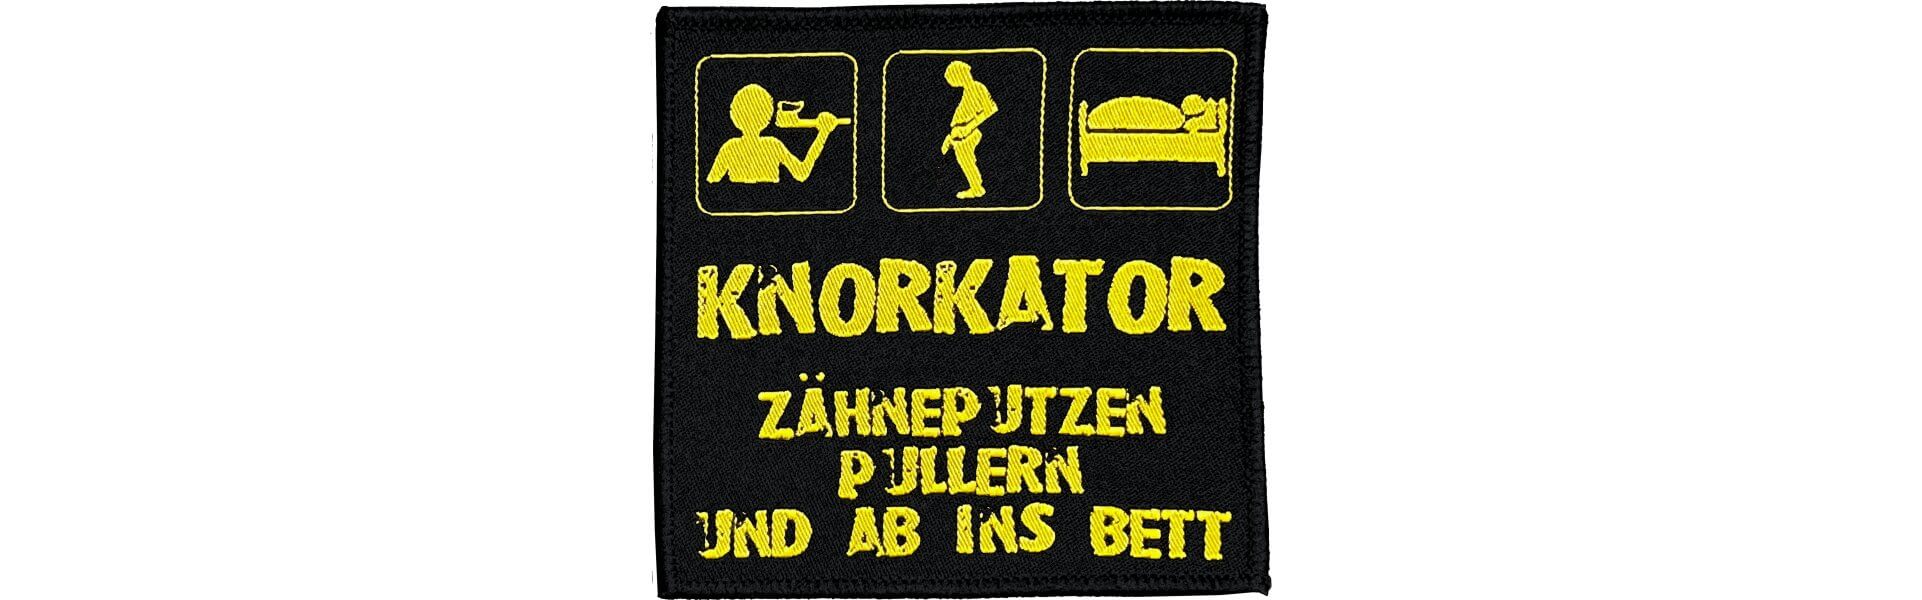 Knorkator patches